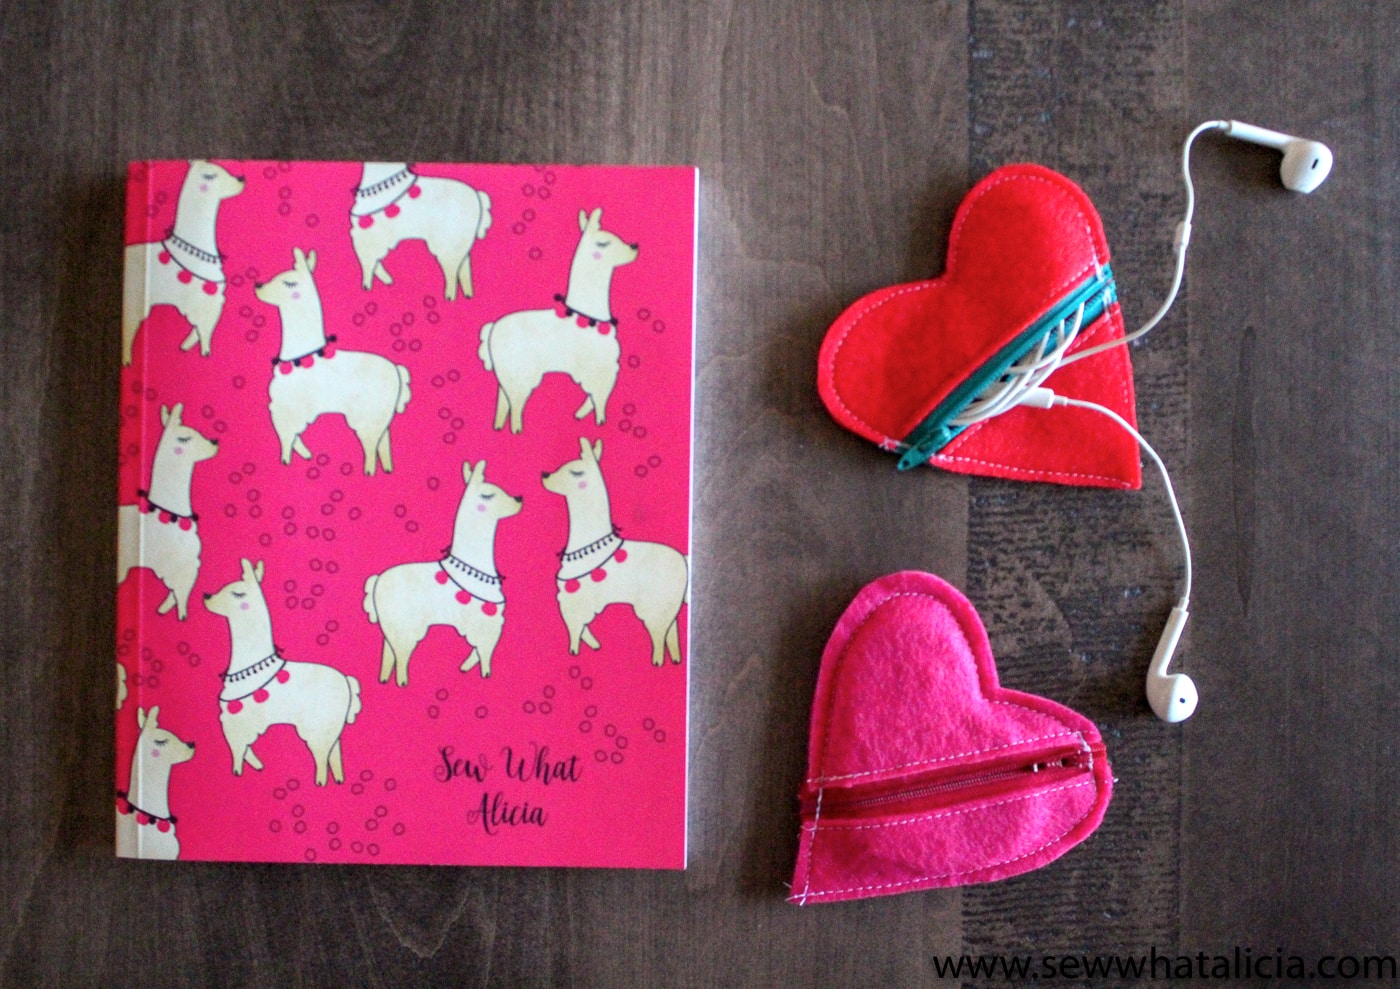 Fun Craft Gifts for Kids - Sew What, Alicia?